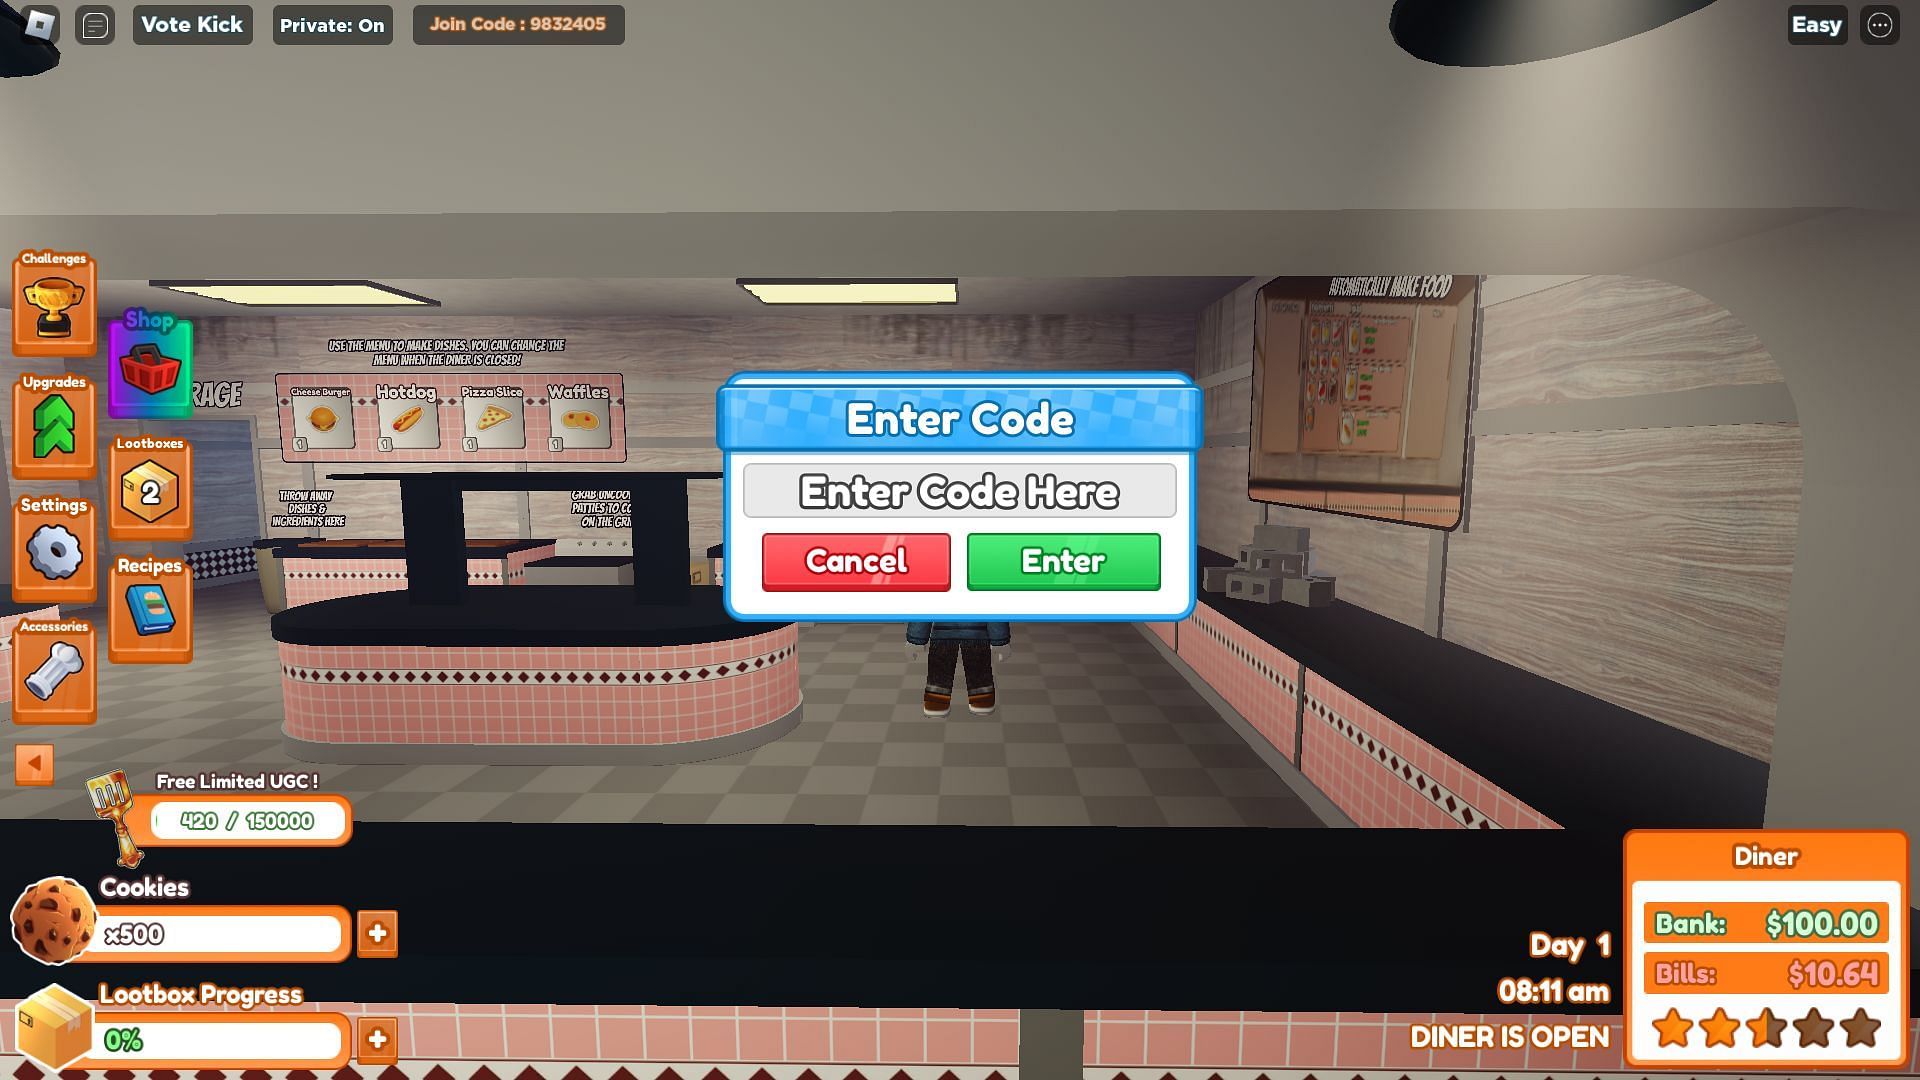 Active codes for Diner Simulator (Image via Roblox)